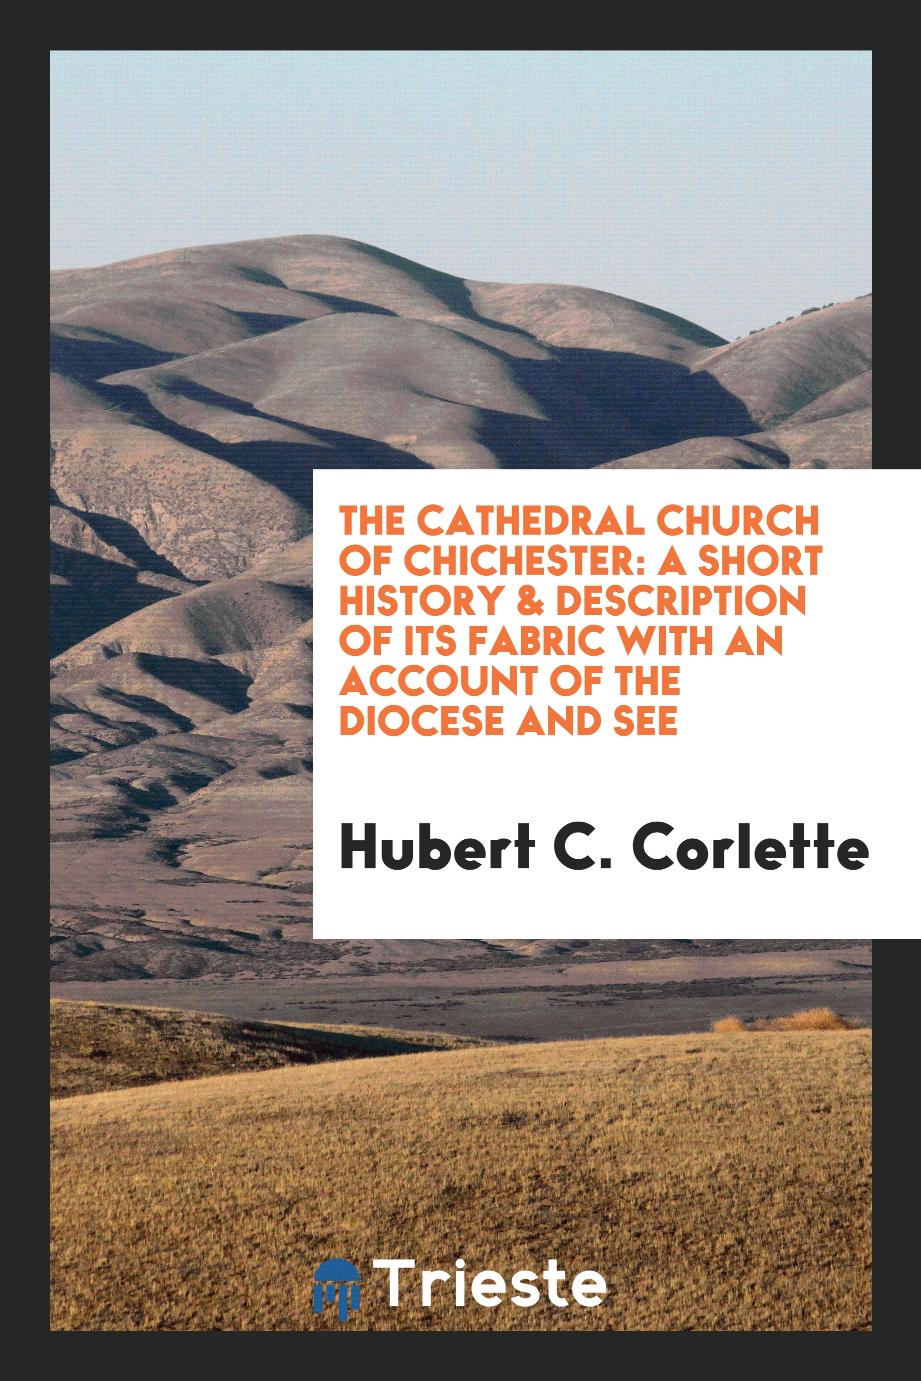 The Cathedral Church of Chichester: A Short History & Description of Its Fabric with an Account of the Diocese and See